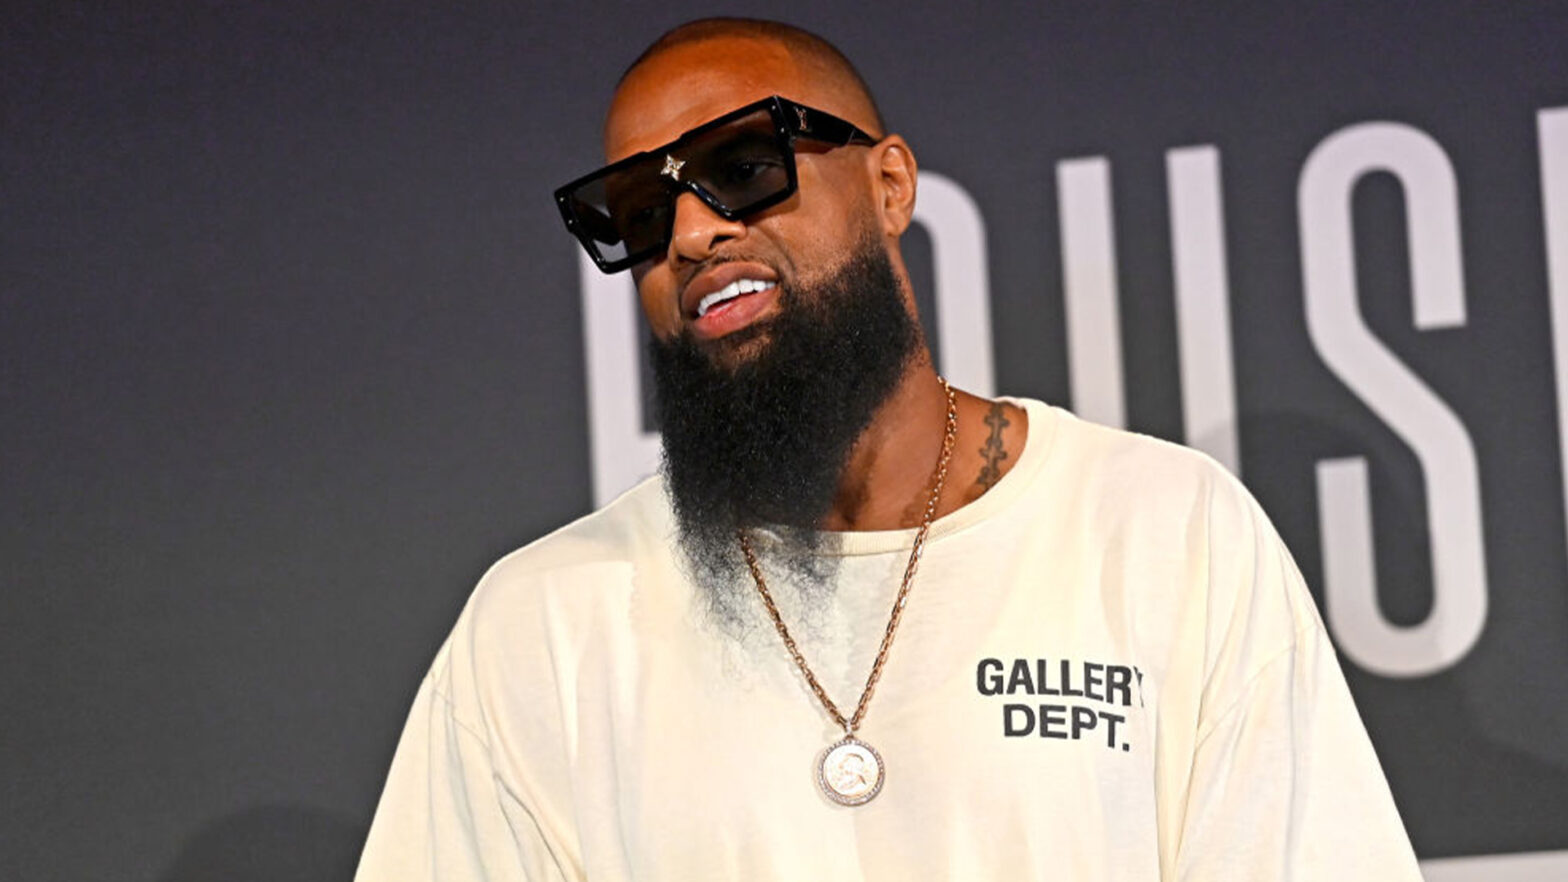 Slim Thug's Boss Life Construction Company Has Been Aiding Houston With Quality, Affordable Housing Since 2015